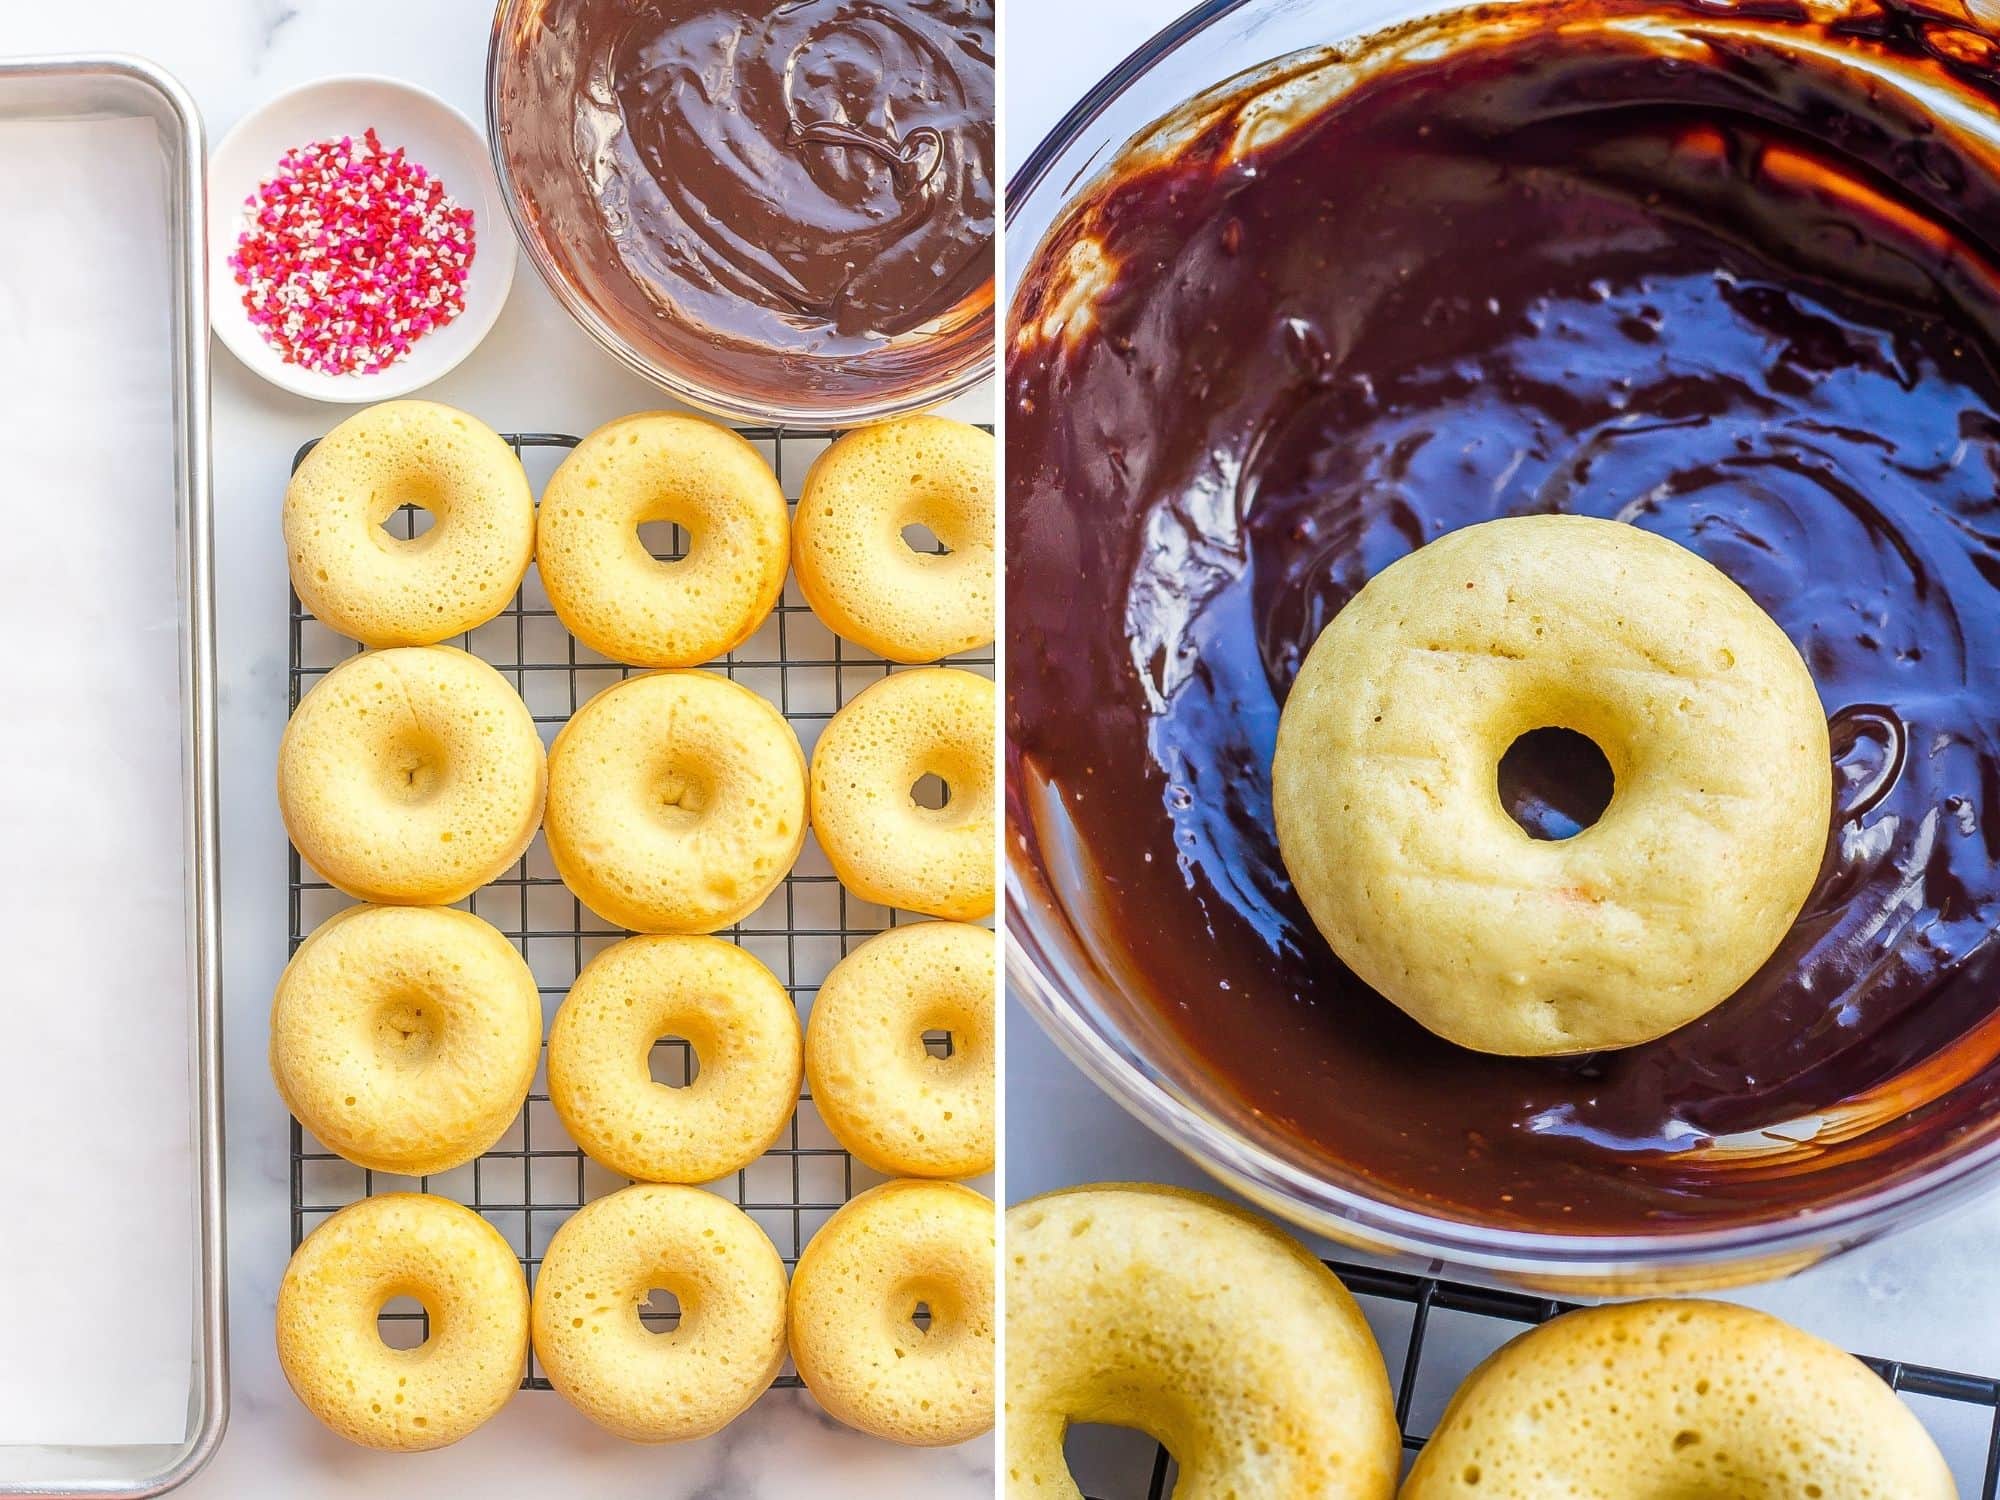 baked donuts in chocolate icing